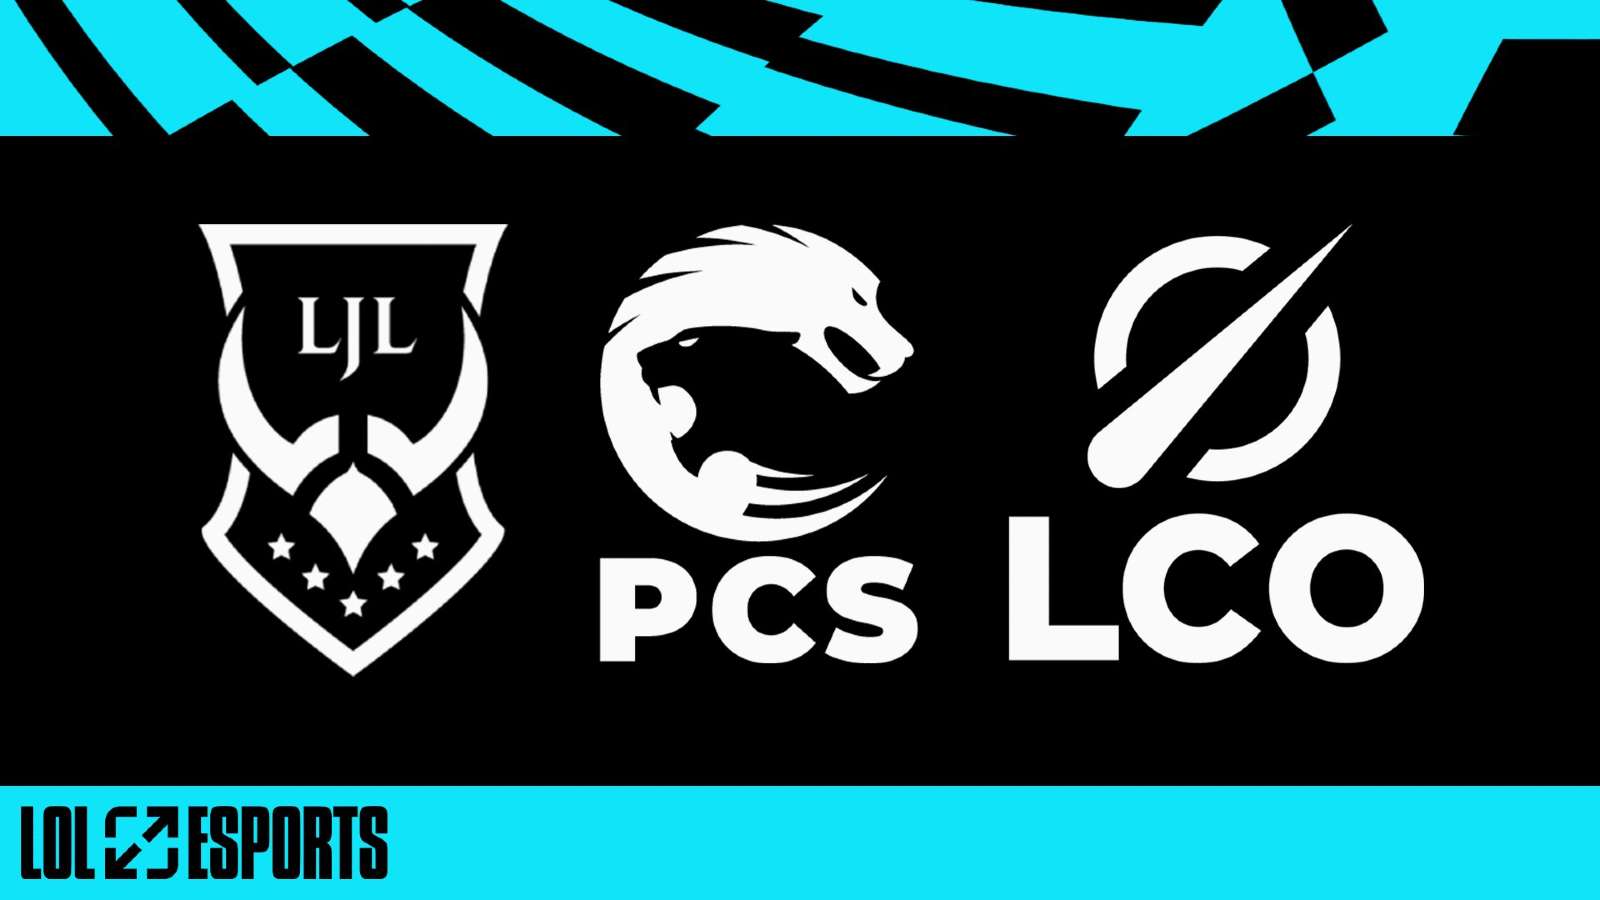 LoL esports announces Japan's LJL will join Oceania in PCS